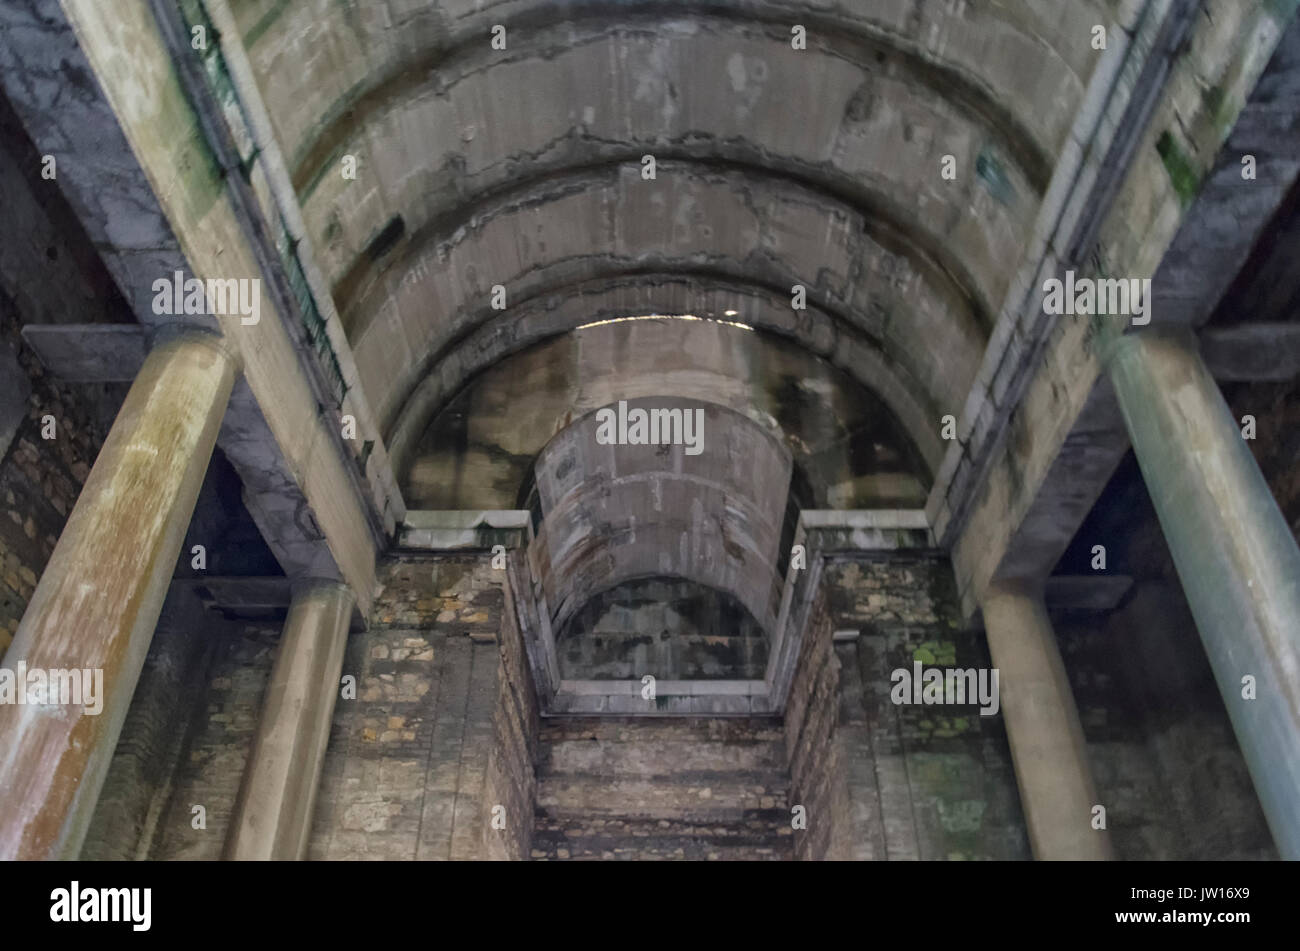 View of the incomplete Mausoleum of Galeazzo Ciano Stock Photo - Alamy